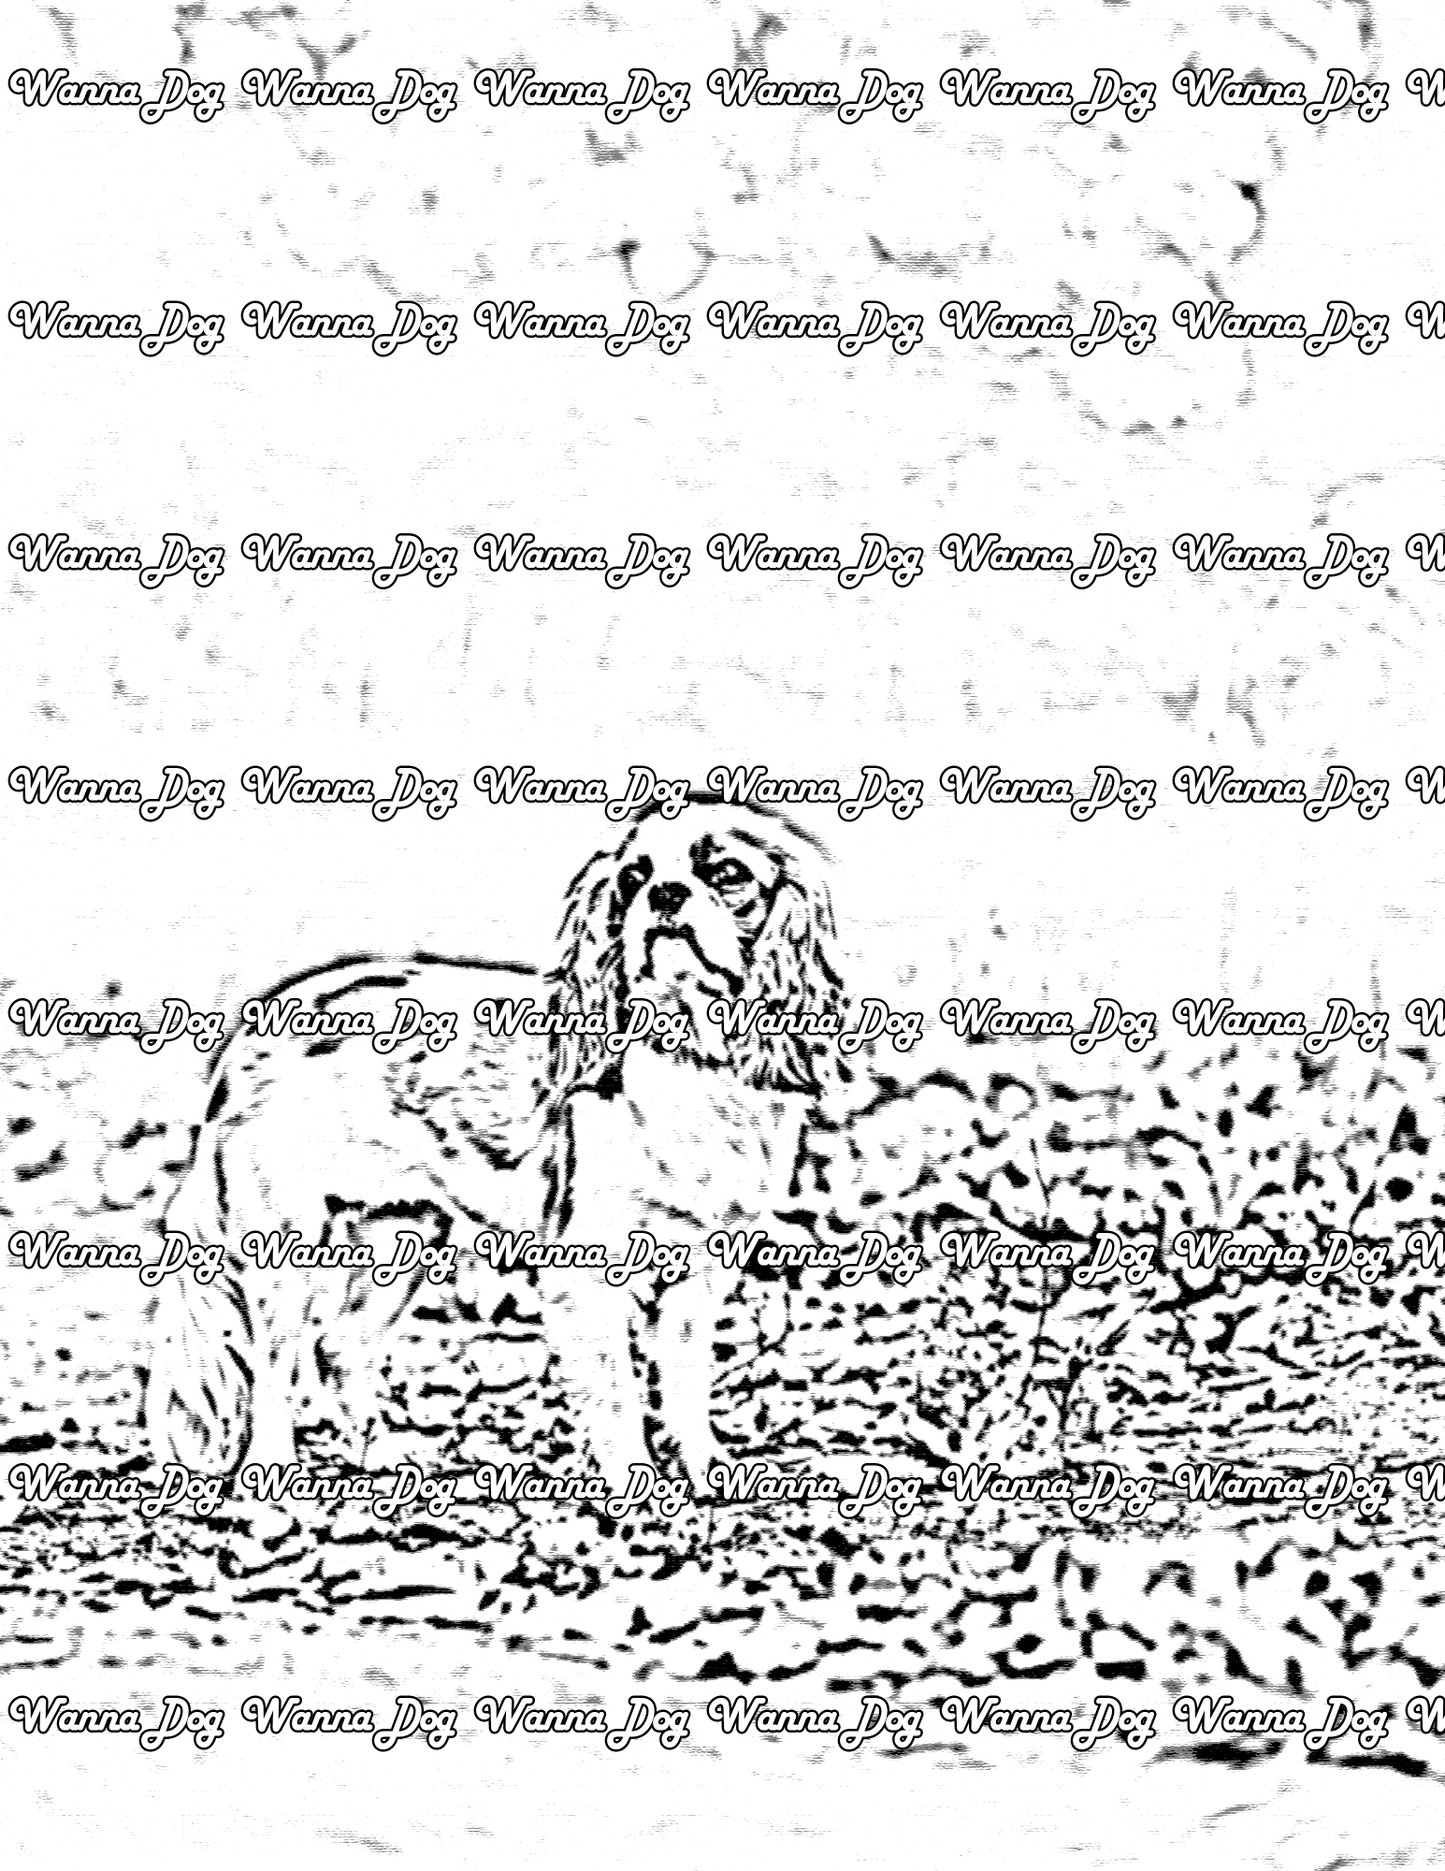 Cavalier King Charles Spaniel Coloring Page of a Cavalier King Charles Spaniel standing outside